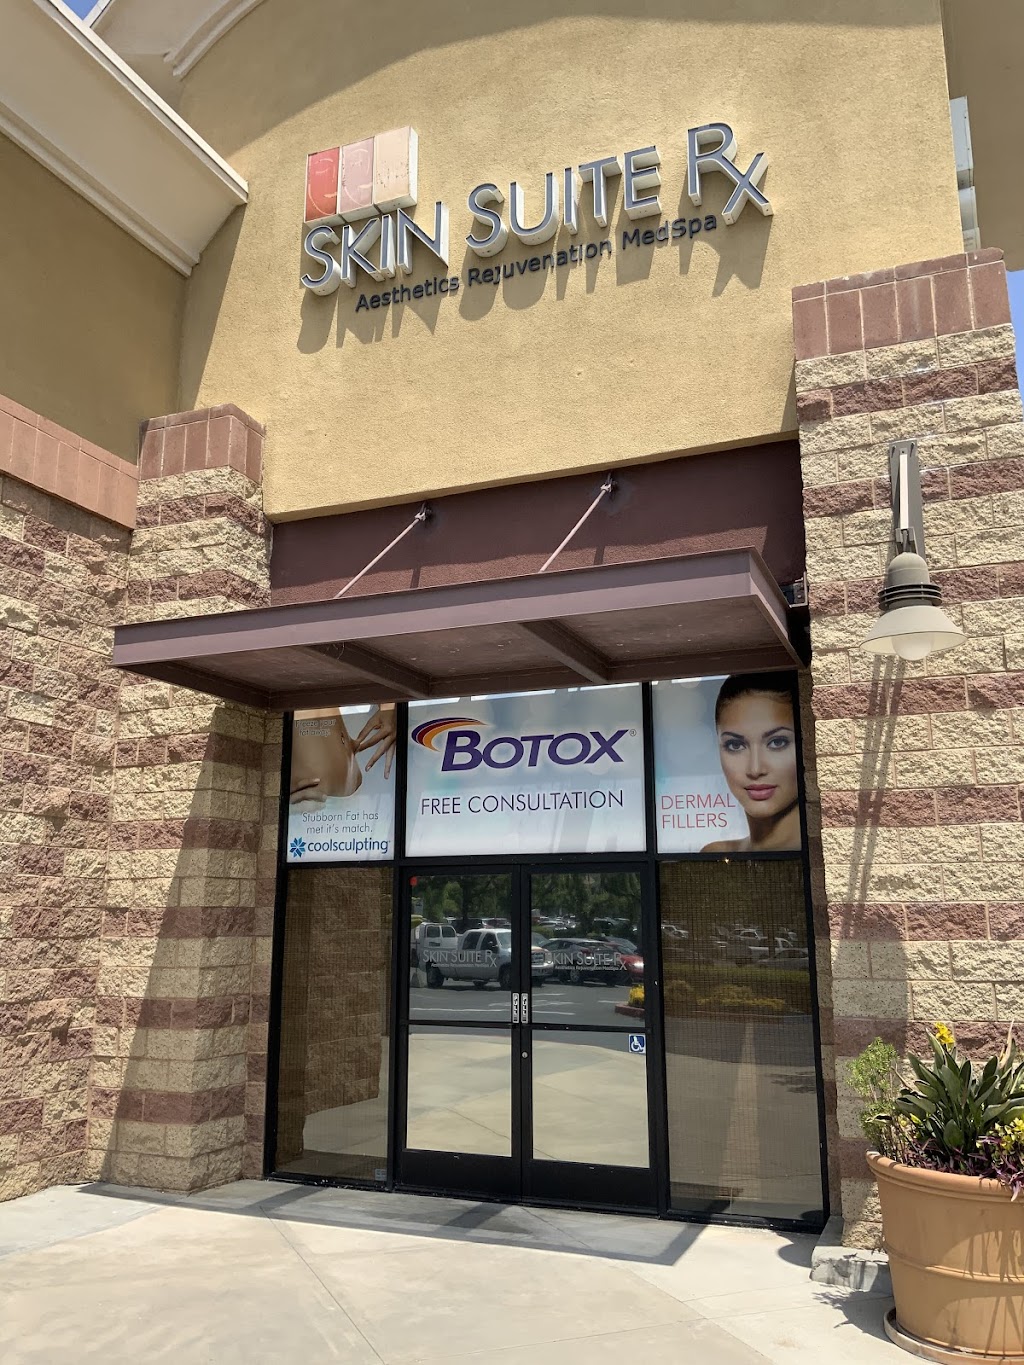 Skin Suite Rx Medspa | 4045 Grand Ave, Chino, CA 91710, USA | Phone: (909) 902-1988